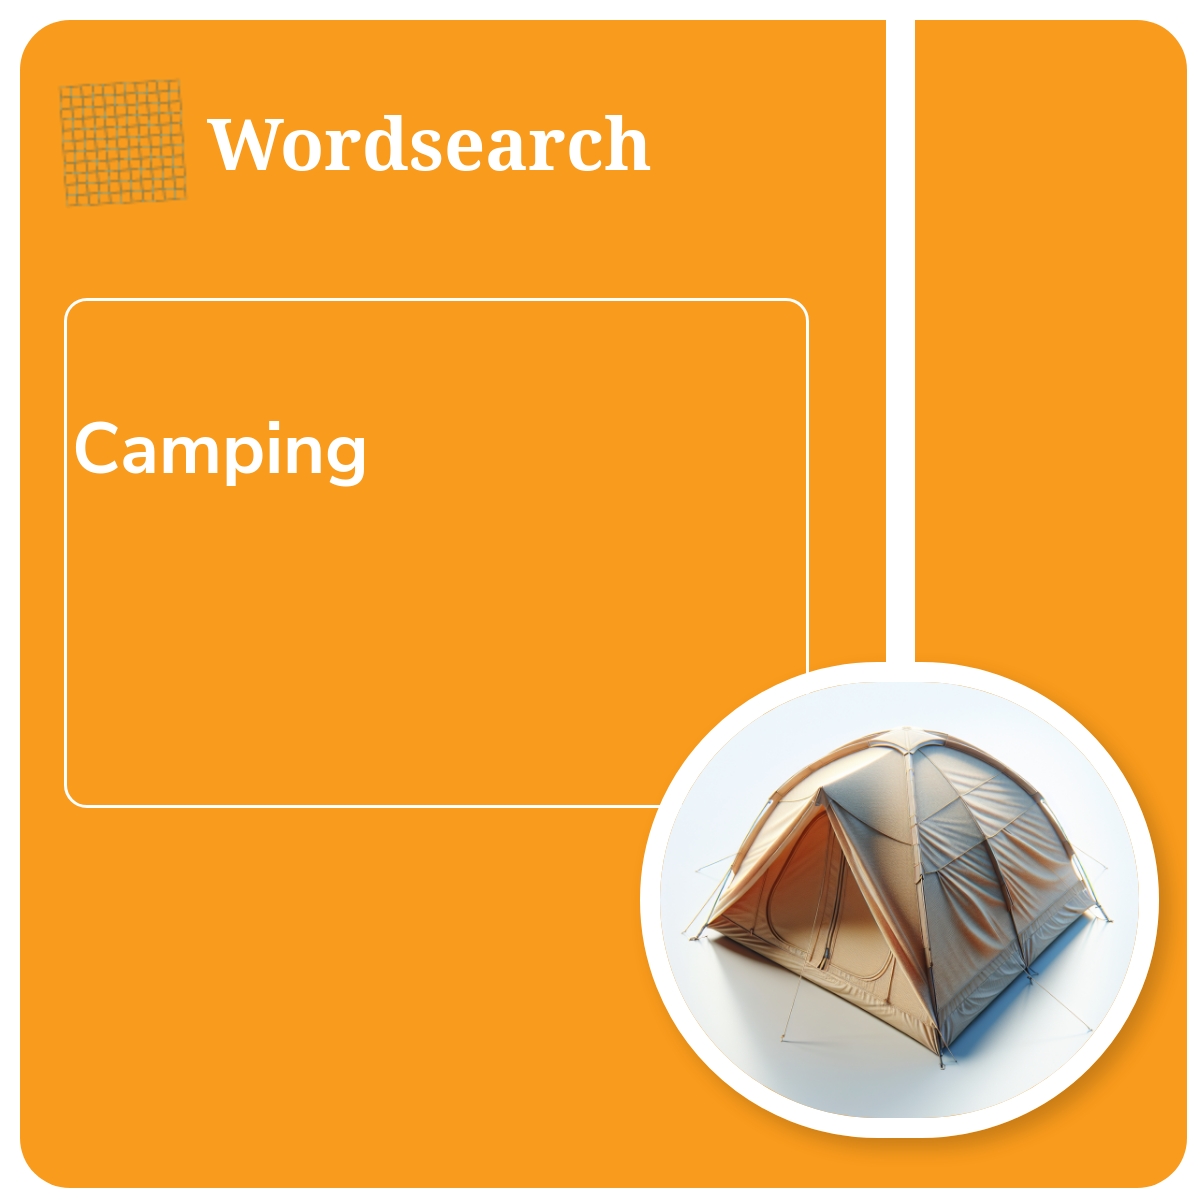 Wordsearch: Camping